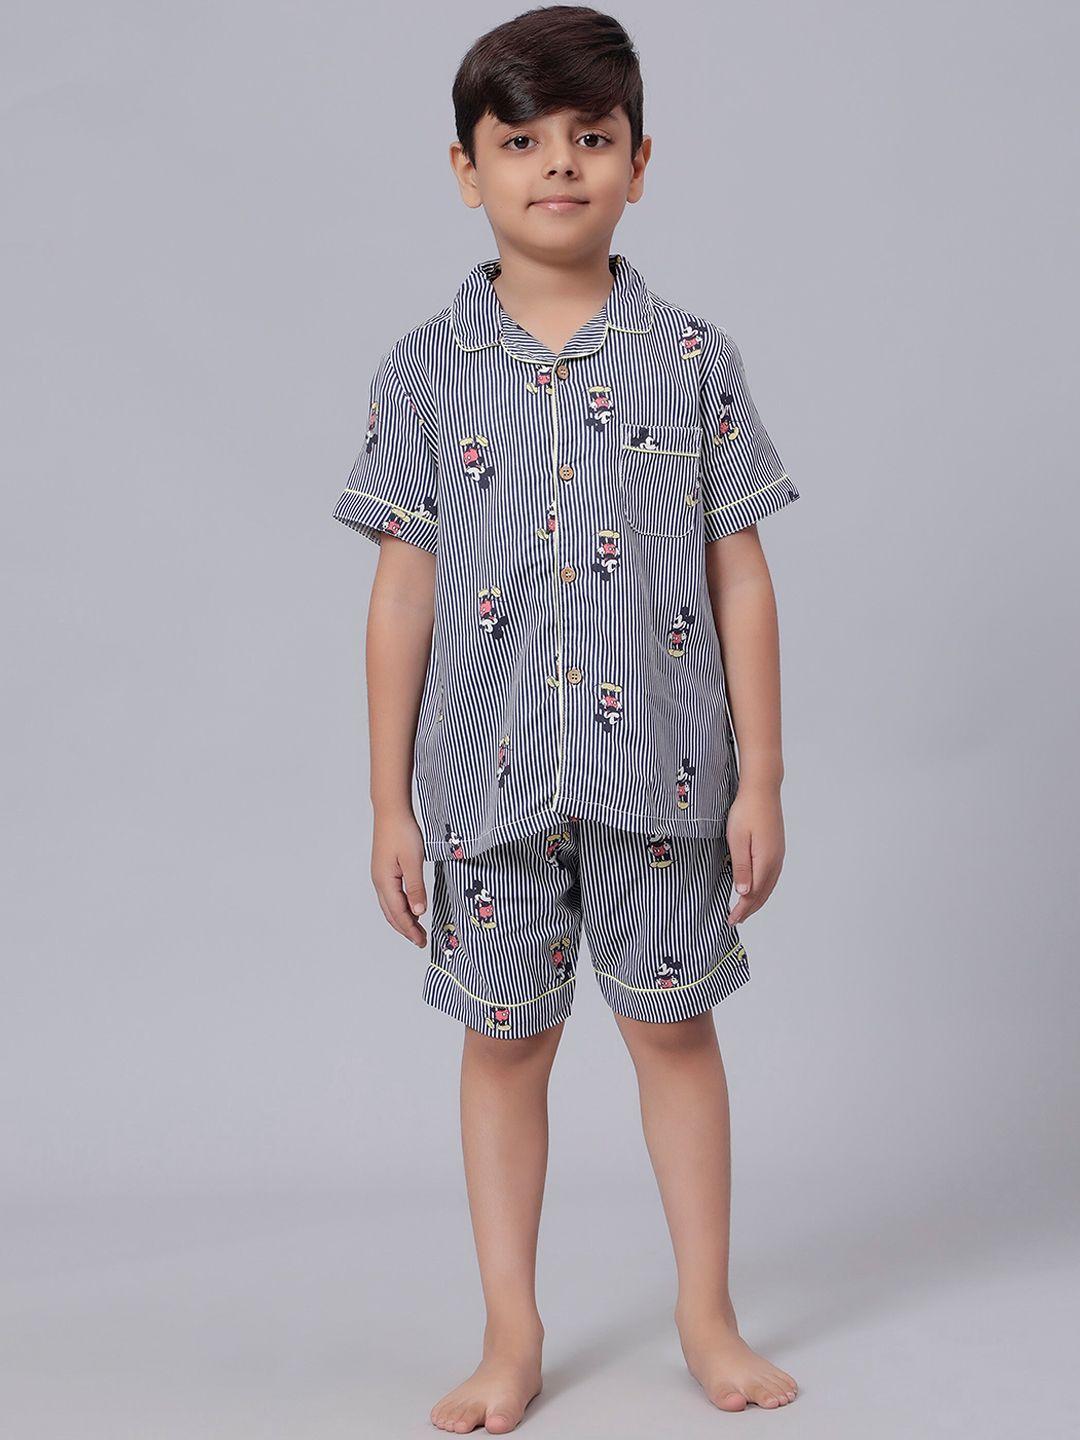 biglilpeople boys graphic printed shirt with shorts